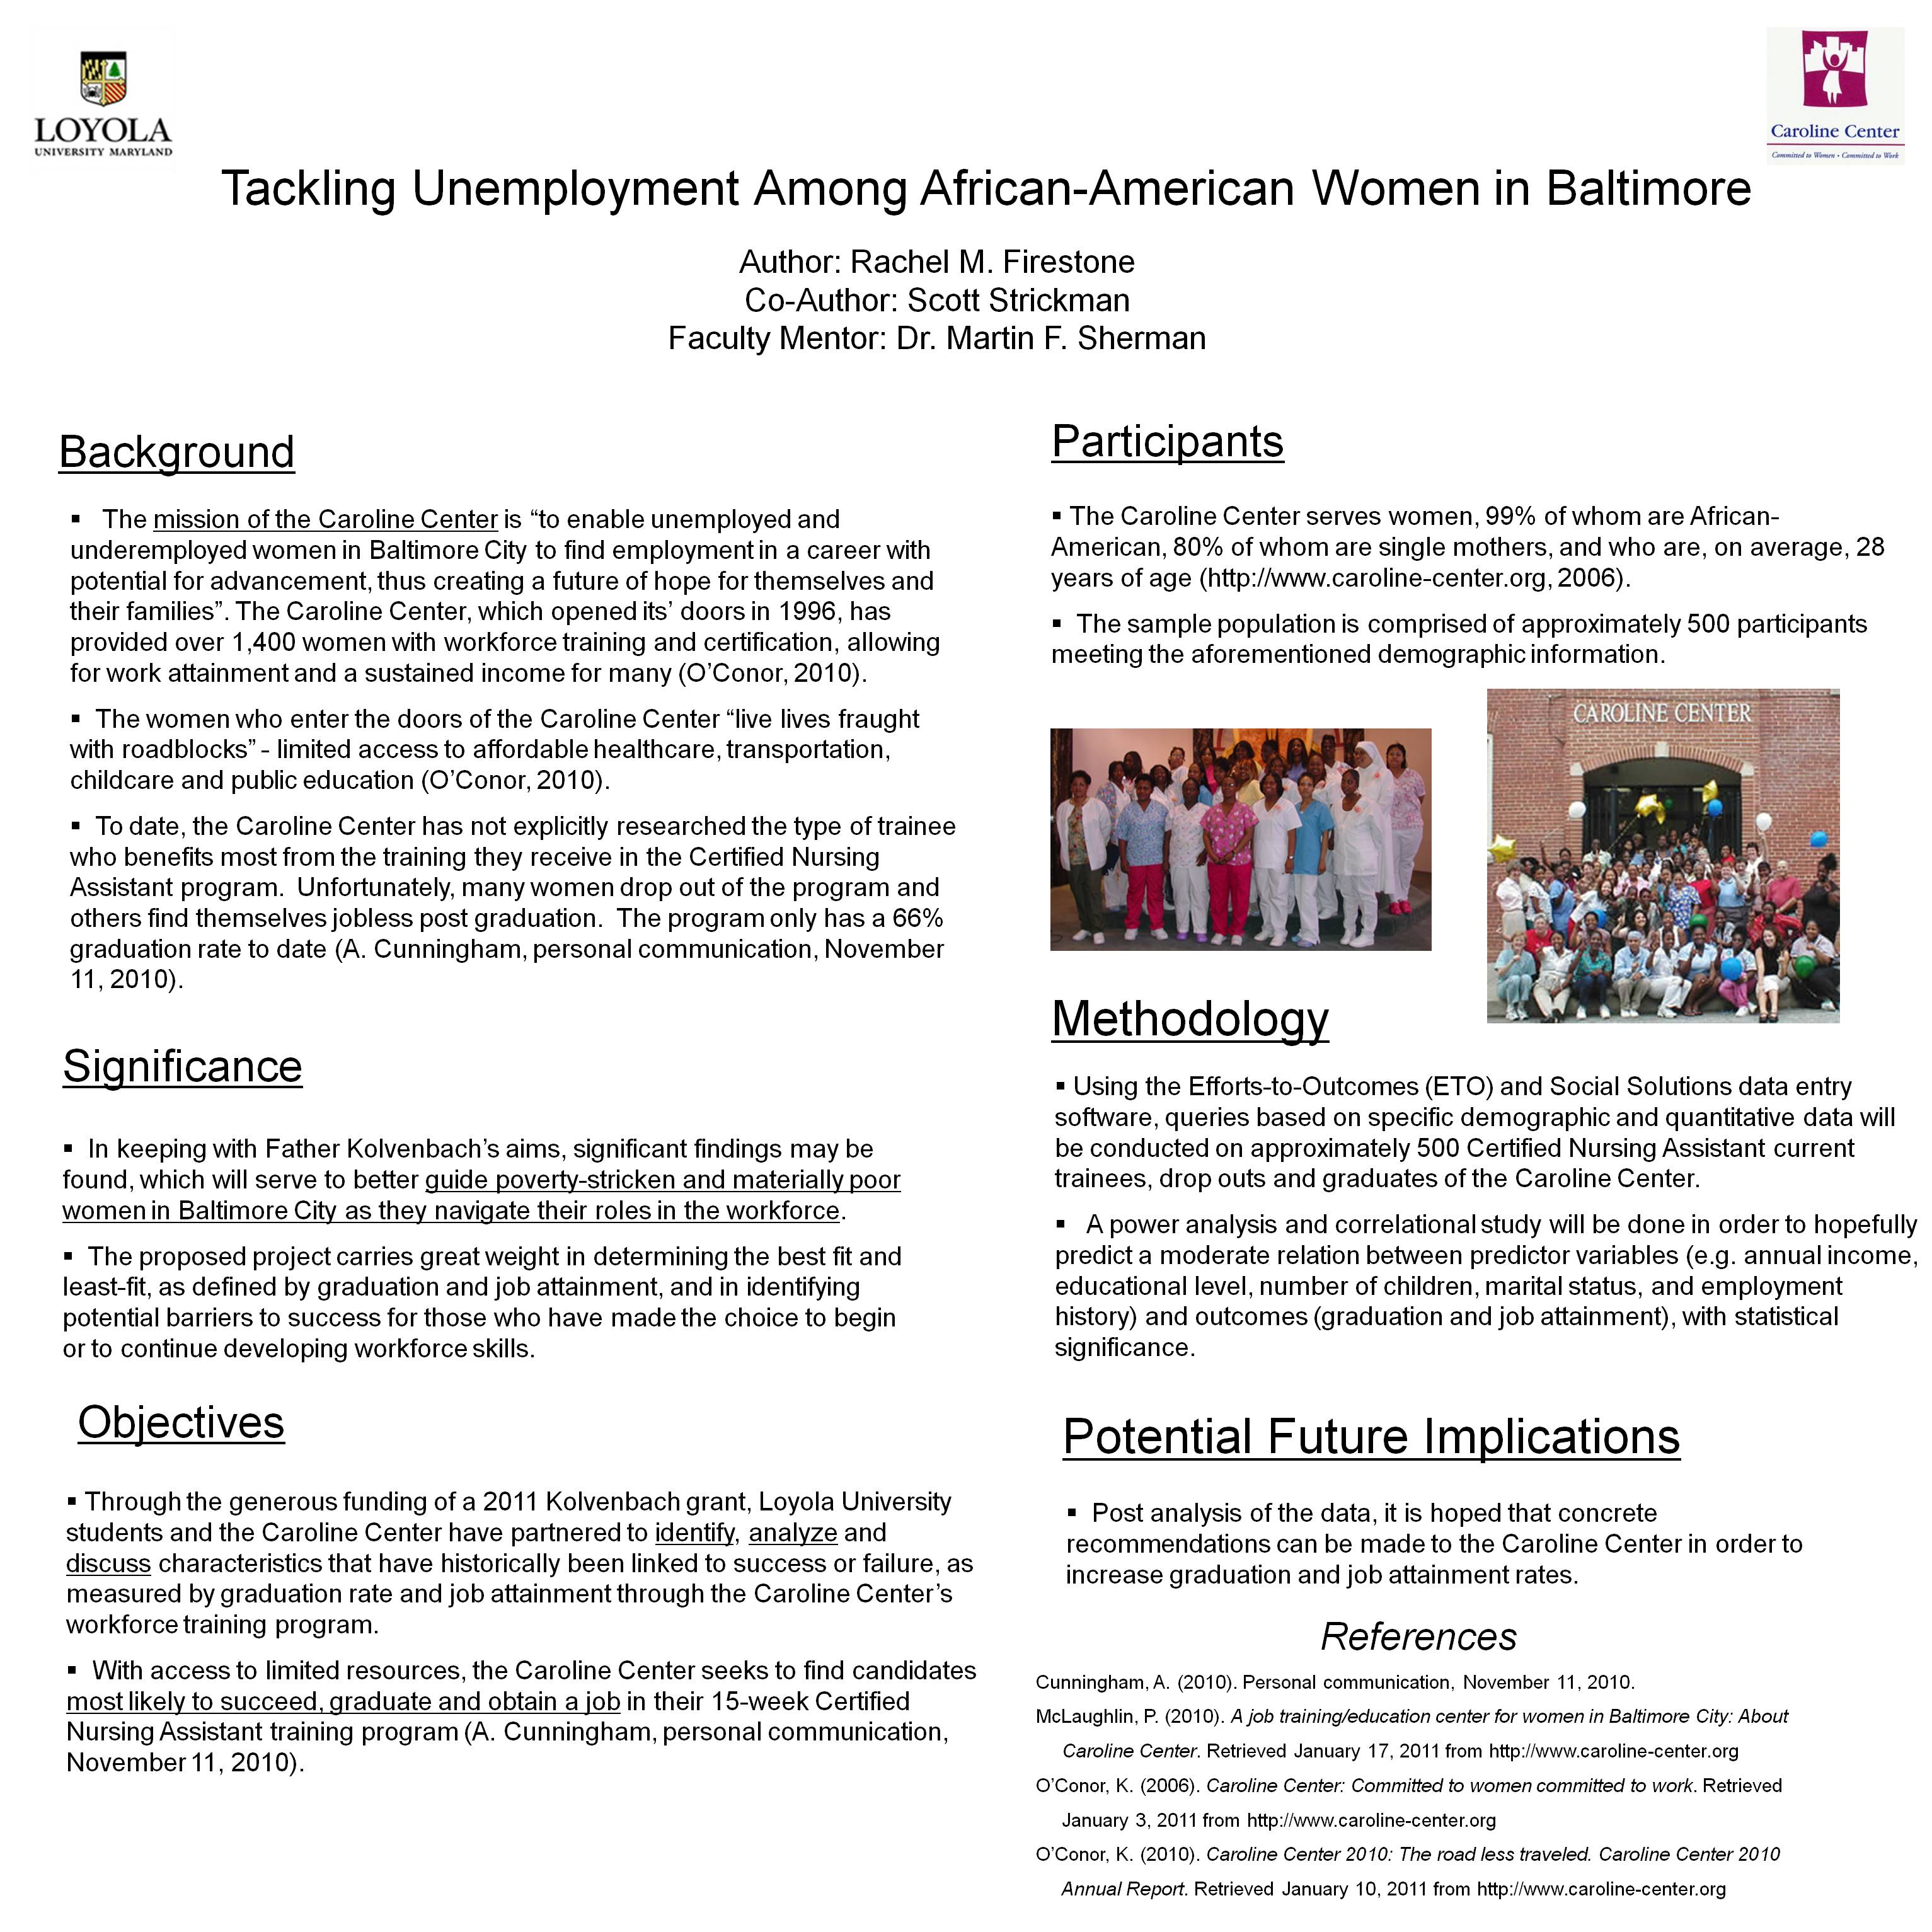 Poster image: Tackling Unemployment Among African-American Women in Baltimore